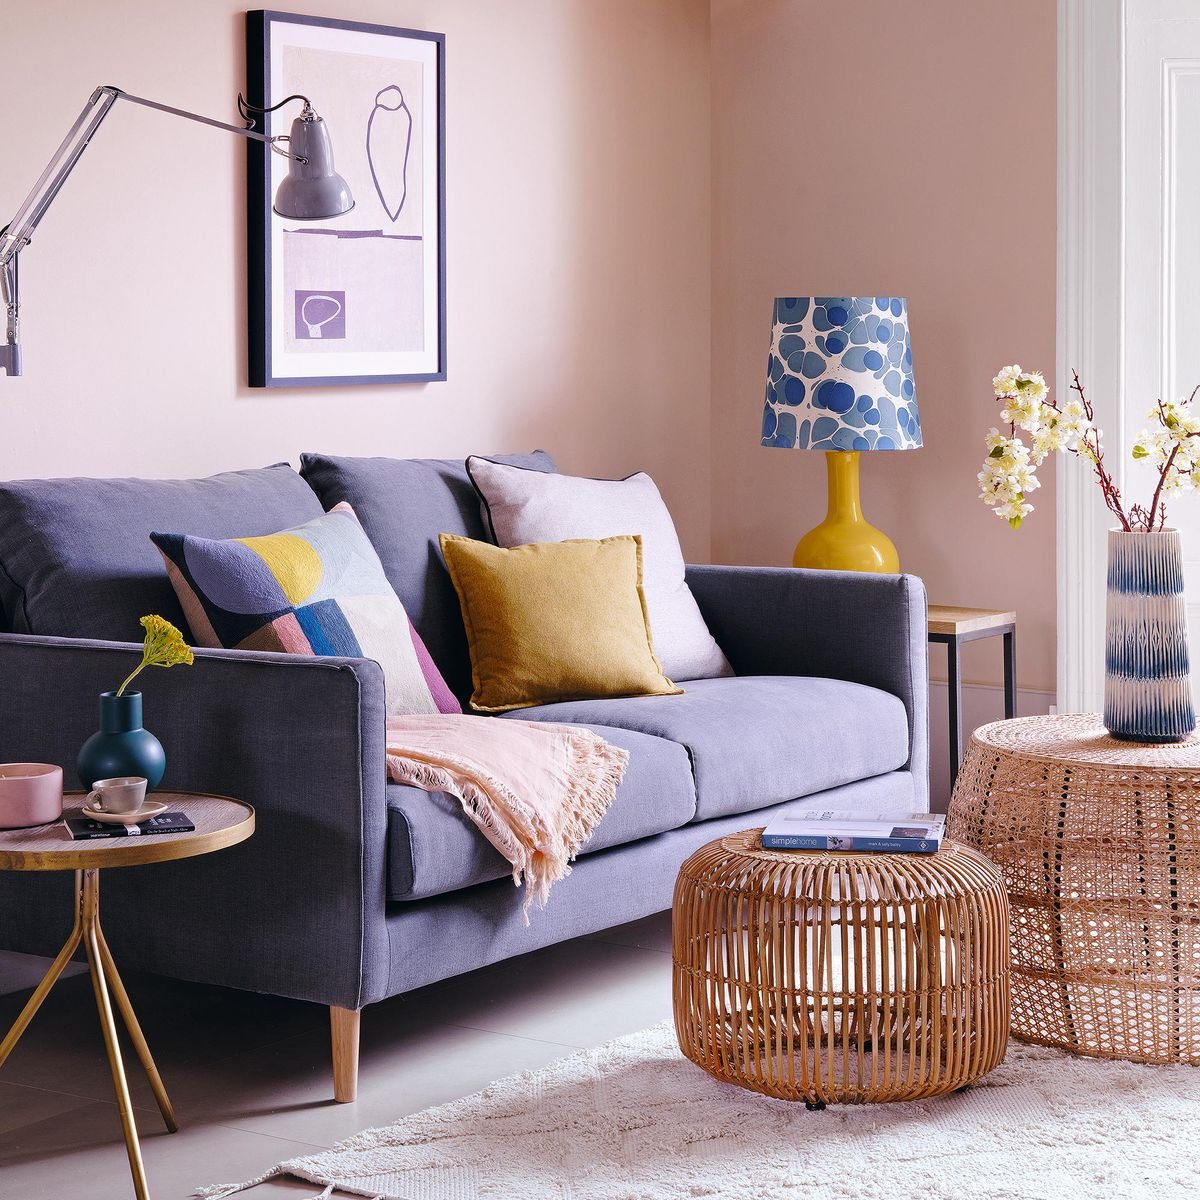 10 small living room colour ideas that you need on your design radar right now